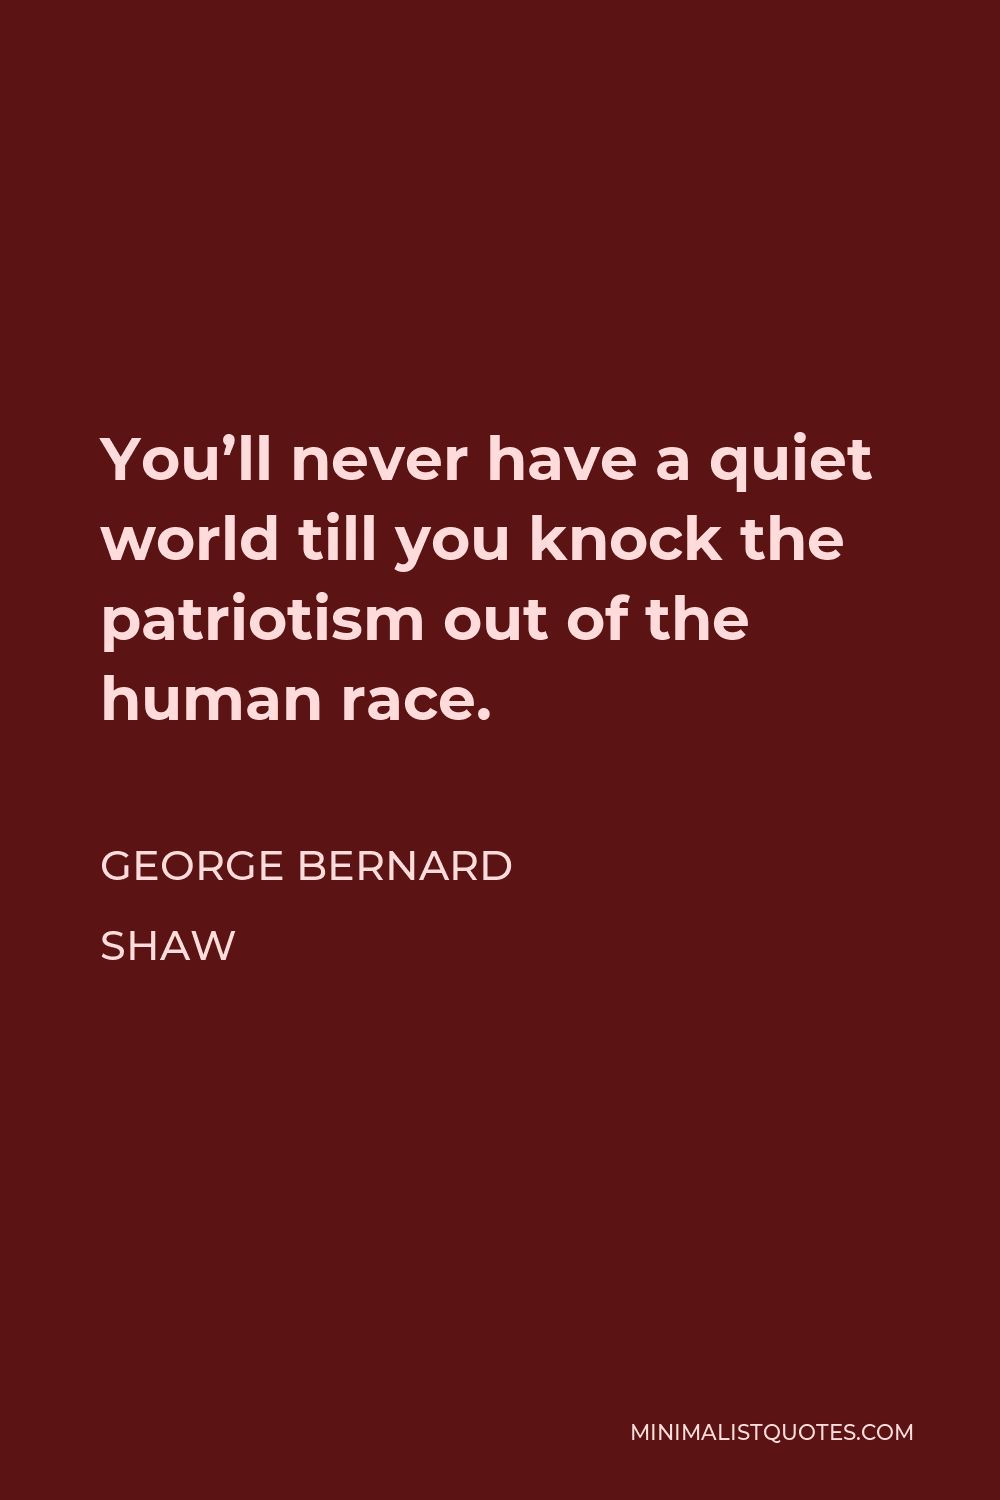 George Bernard Shaw Quote - You’ll never have a quiet world till you knock the patriotism out of the human race.